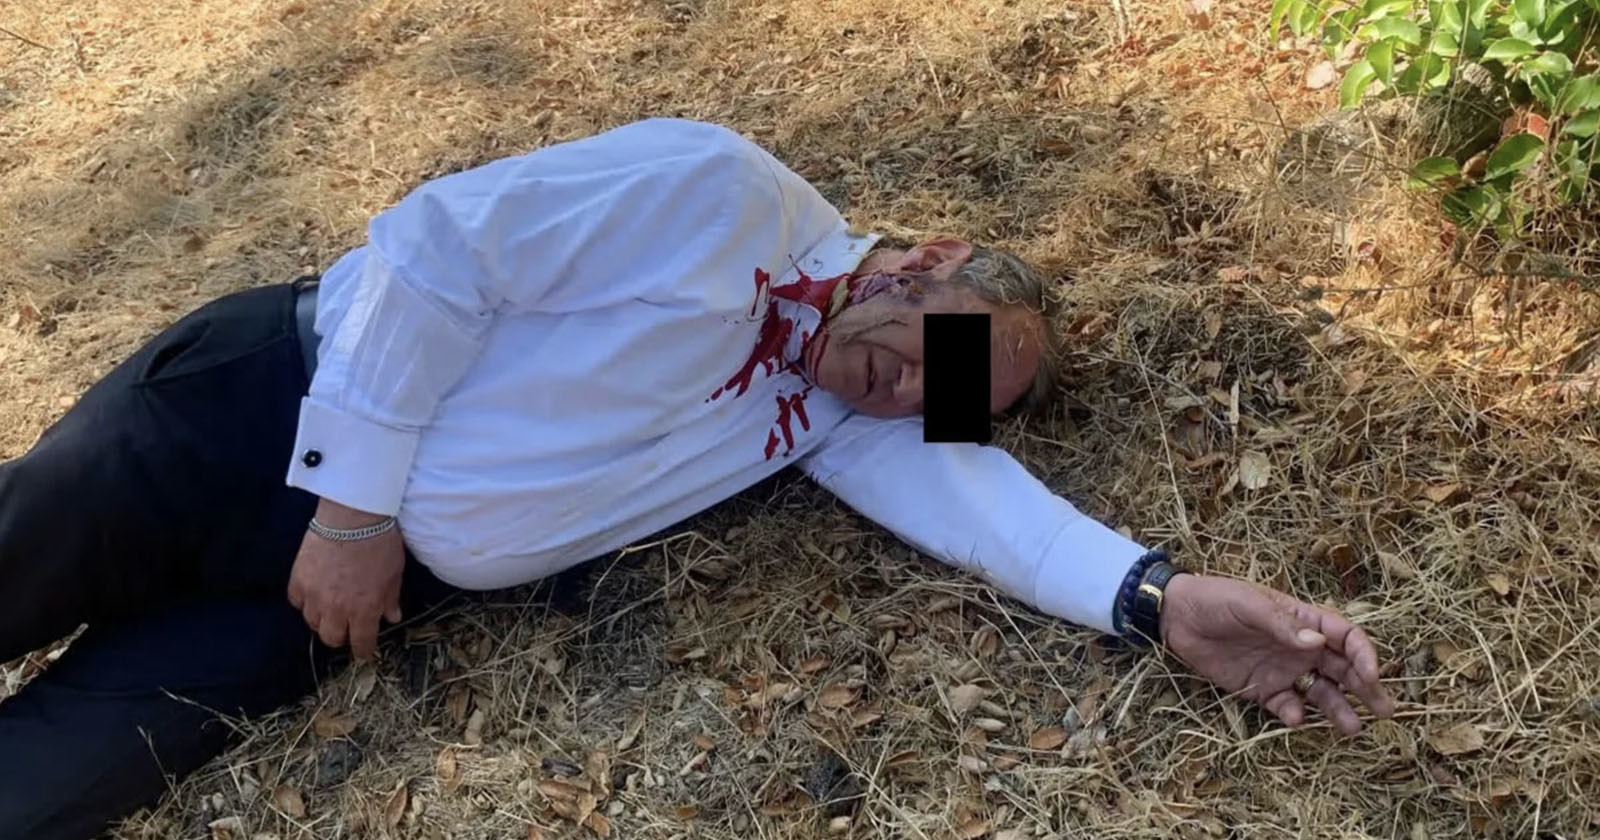 Federal Agents Staged Fake Murder Photo to Stop Assassination Plot